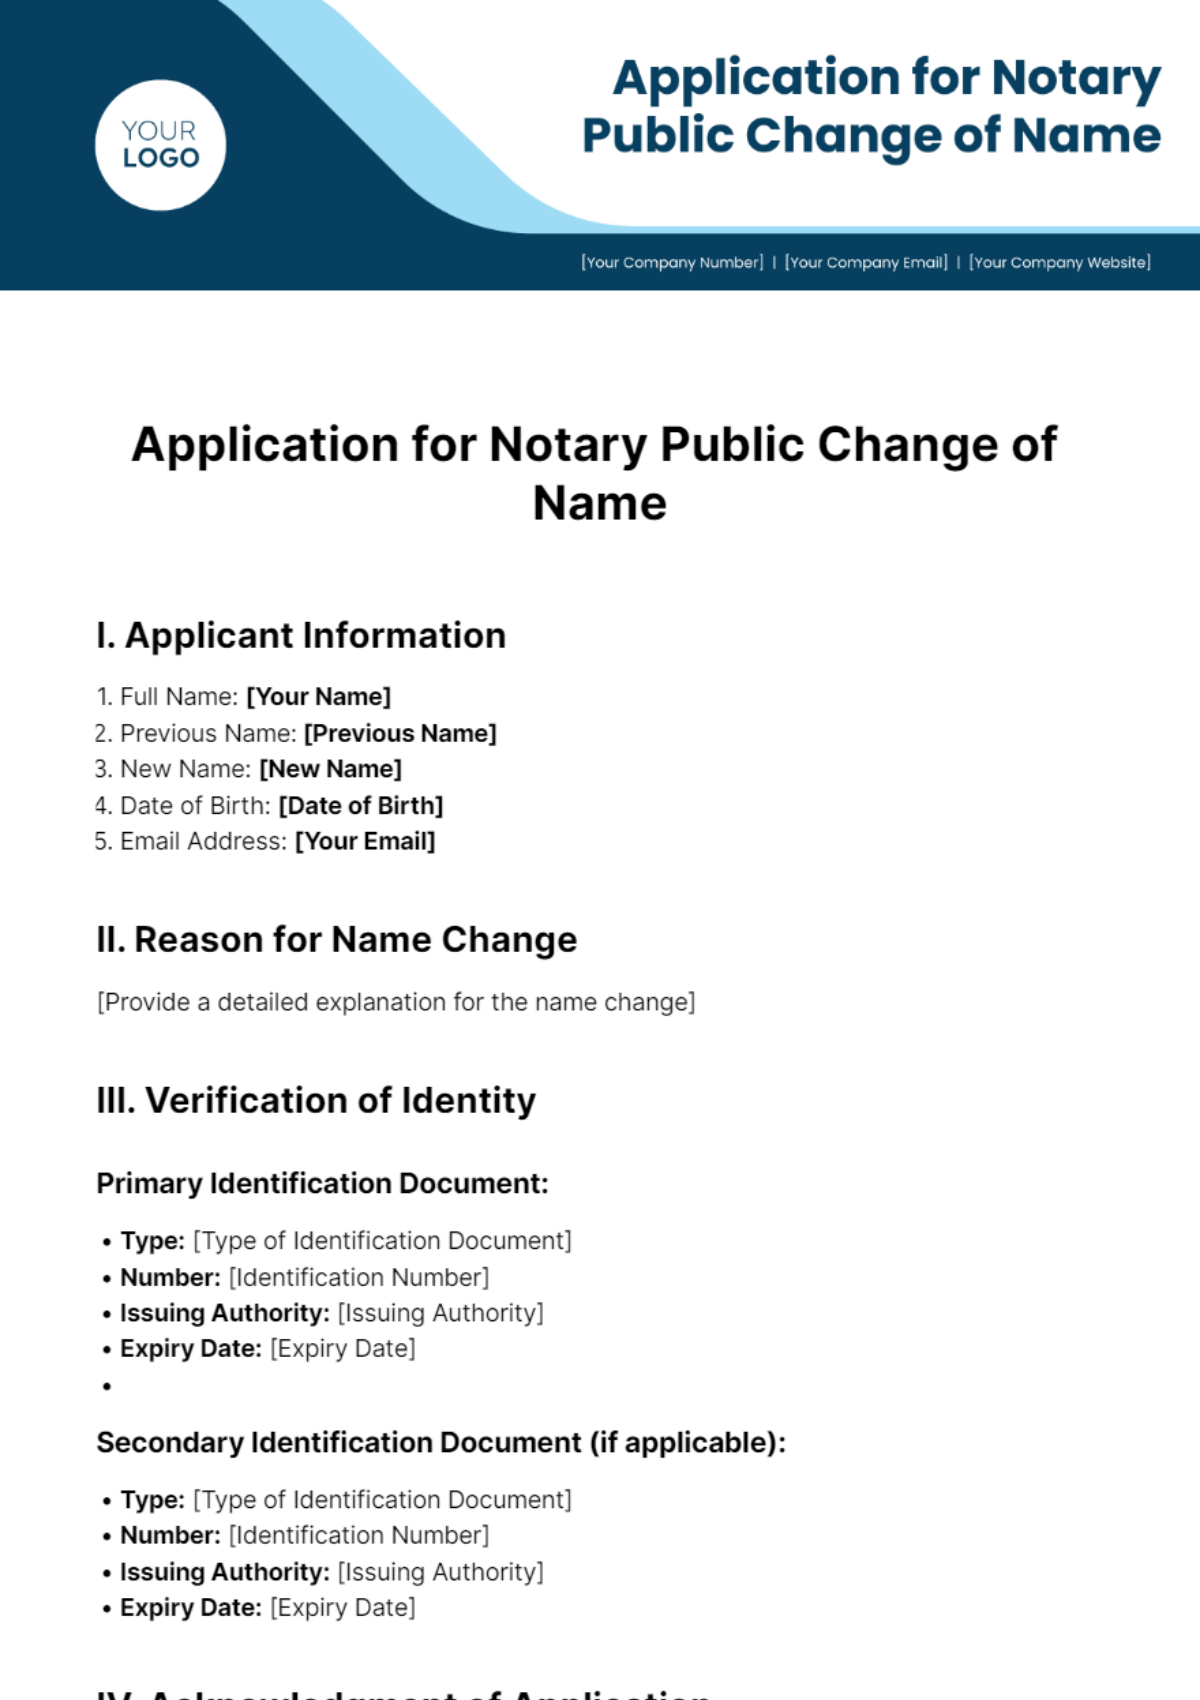 Free Application For Notary Public Change Of Name Template